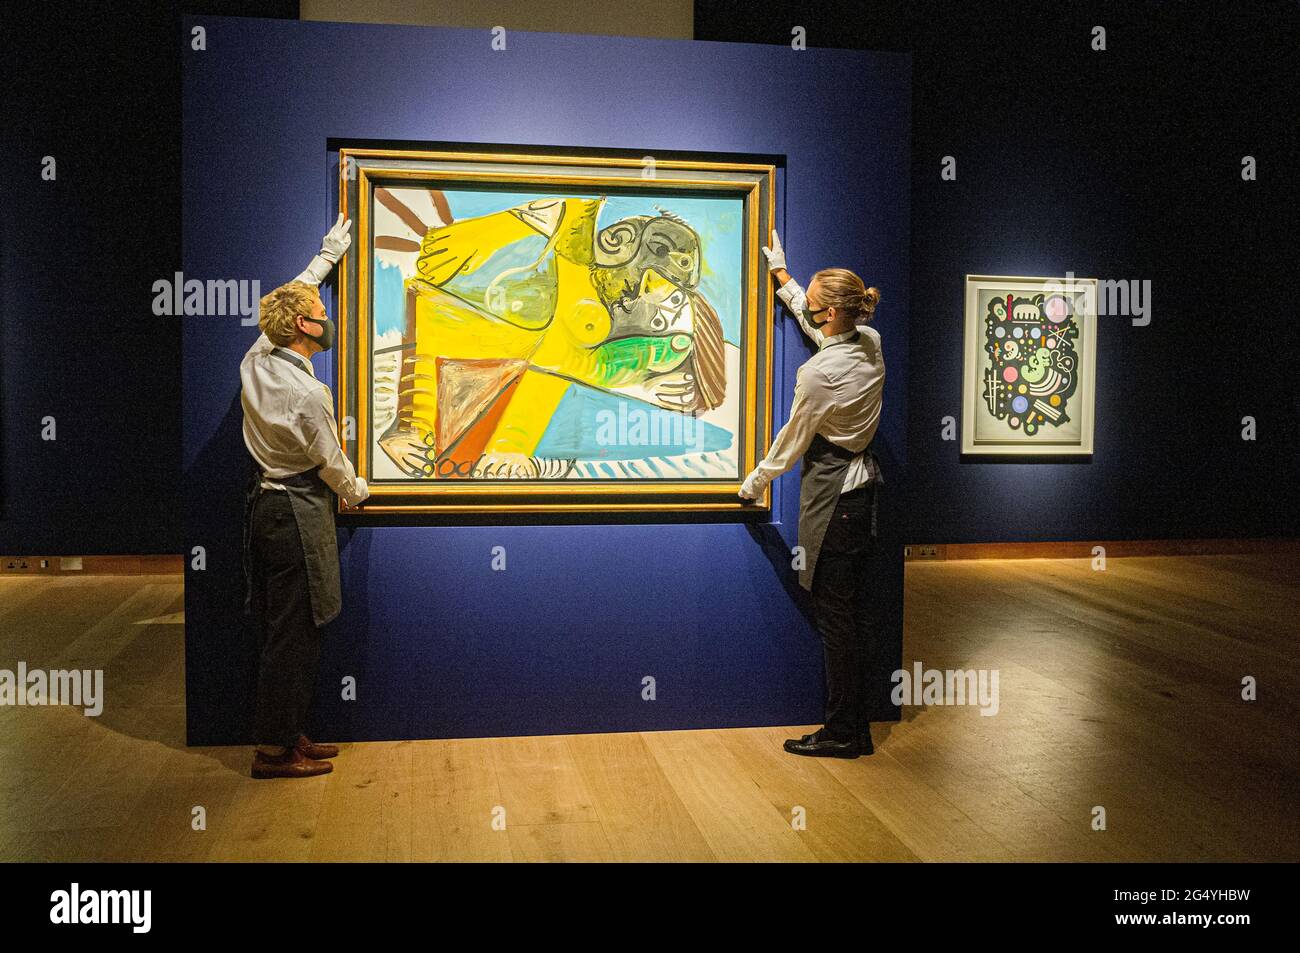 LONDON 24 June 2021. PABLO PICASSO (1881-1973) L'Étreinte oil on canvas. Painted in Mougins on 23 October 1969 Estimate GBP 11,000,000 - GBP 16,000,000 with WASSILY KANDINSKY (1866-1944). Noir bigarré. Estimate: GBP 8,000,000 - GBP 12,000,000. The sale takes place on 30 June.  IMAGES ARE ASKED TO BE UNDER EMBARGO UNTIL 10:30 AM. Credit amer ghazzal/Alamy Live News Stock Photo